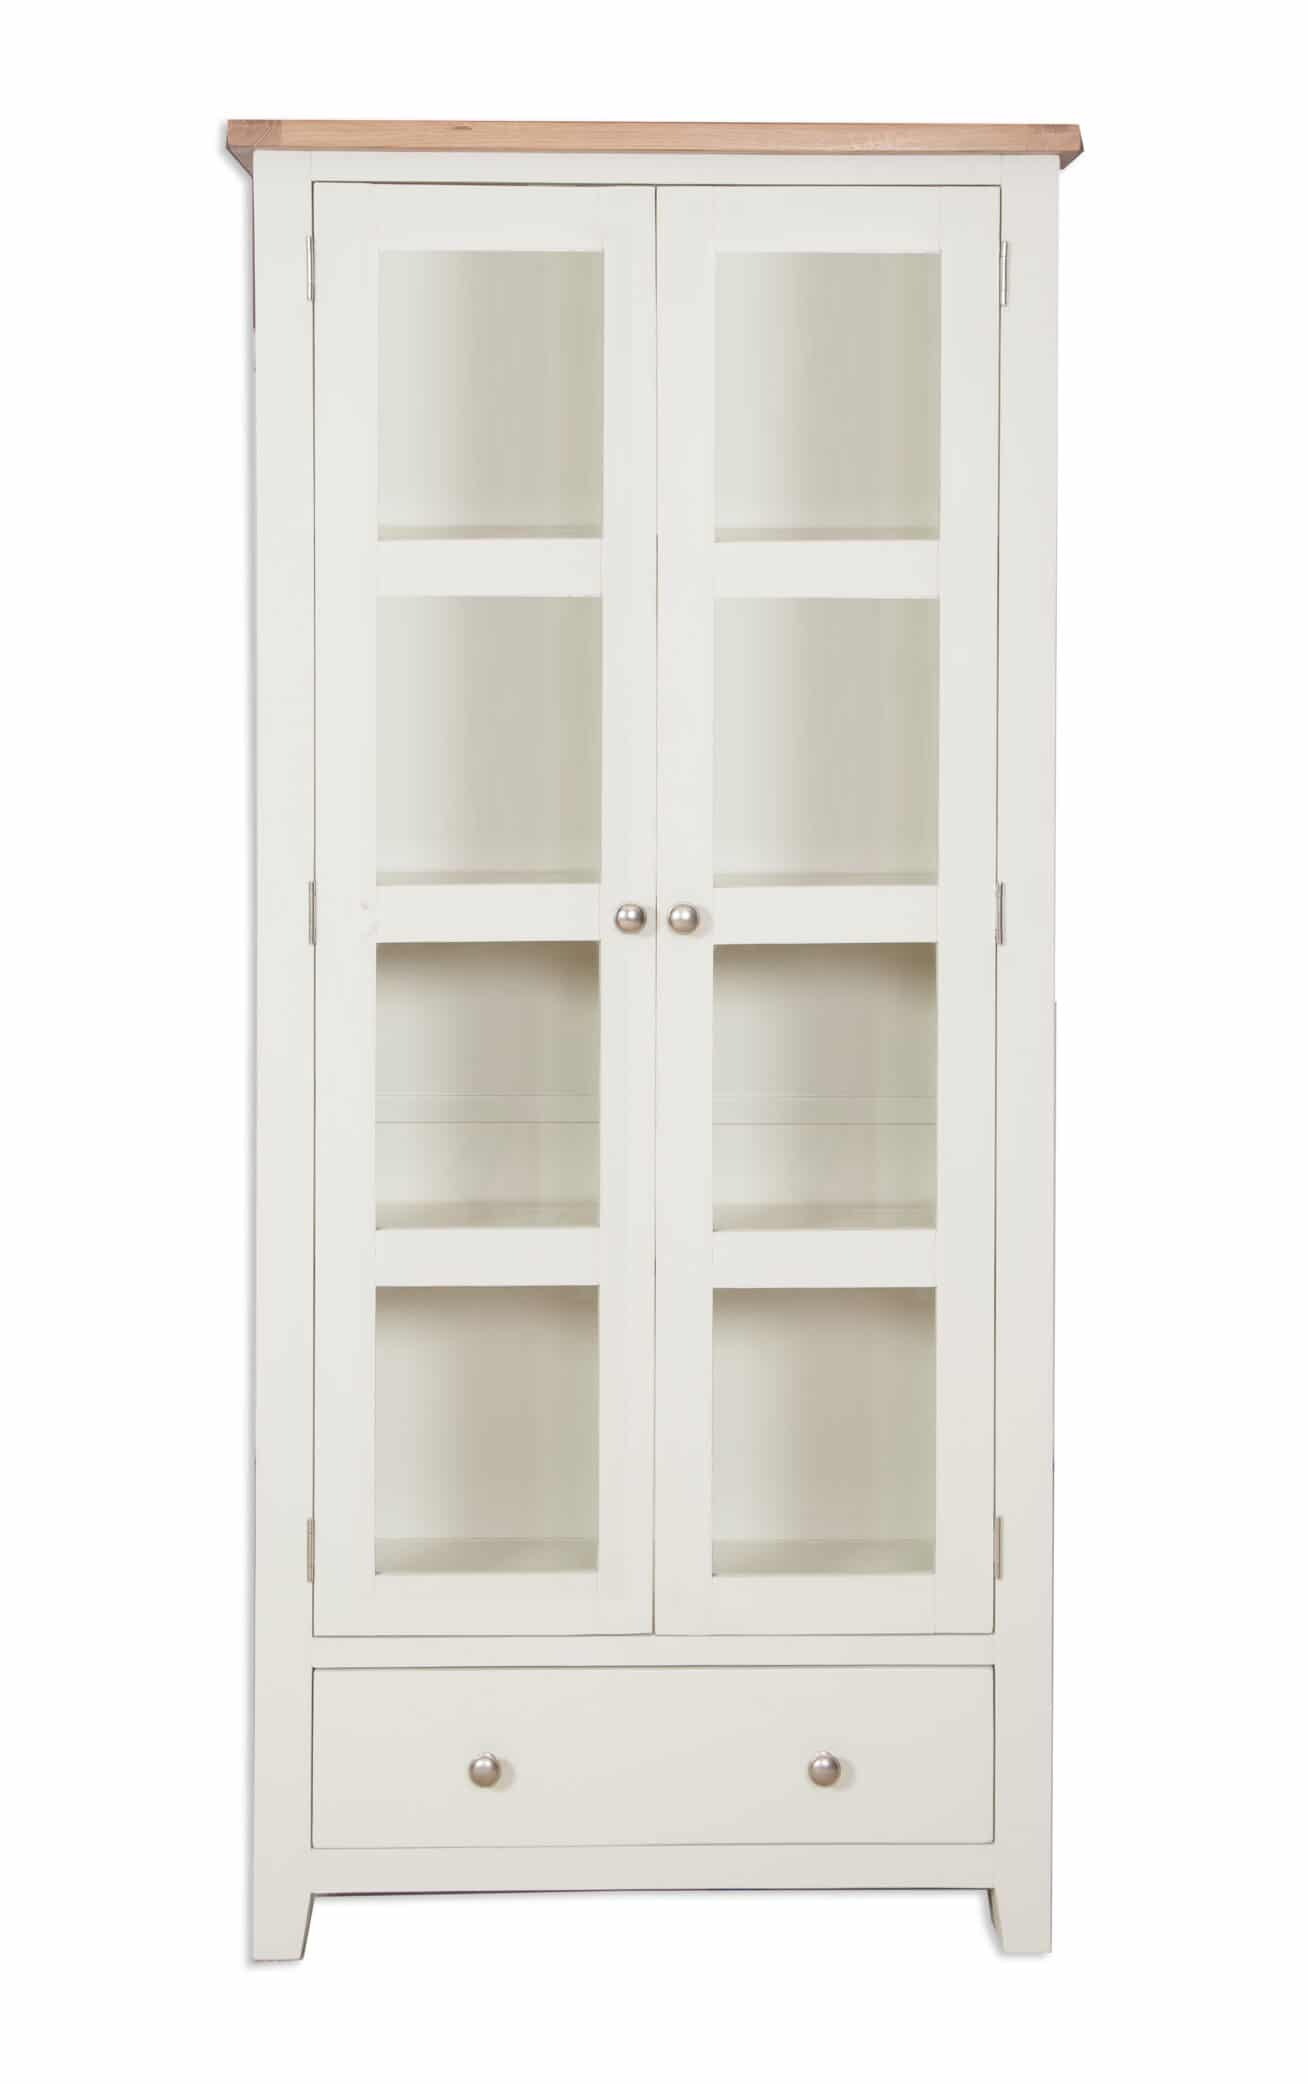 French Ivory Cream Painted Display Cabinet 2 Door 1 Drawer